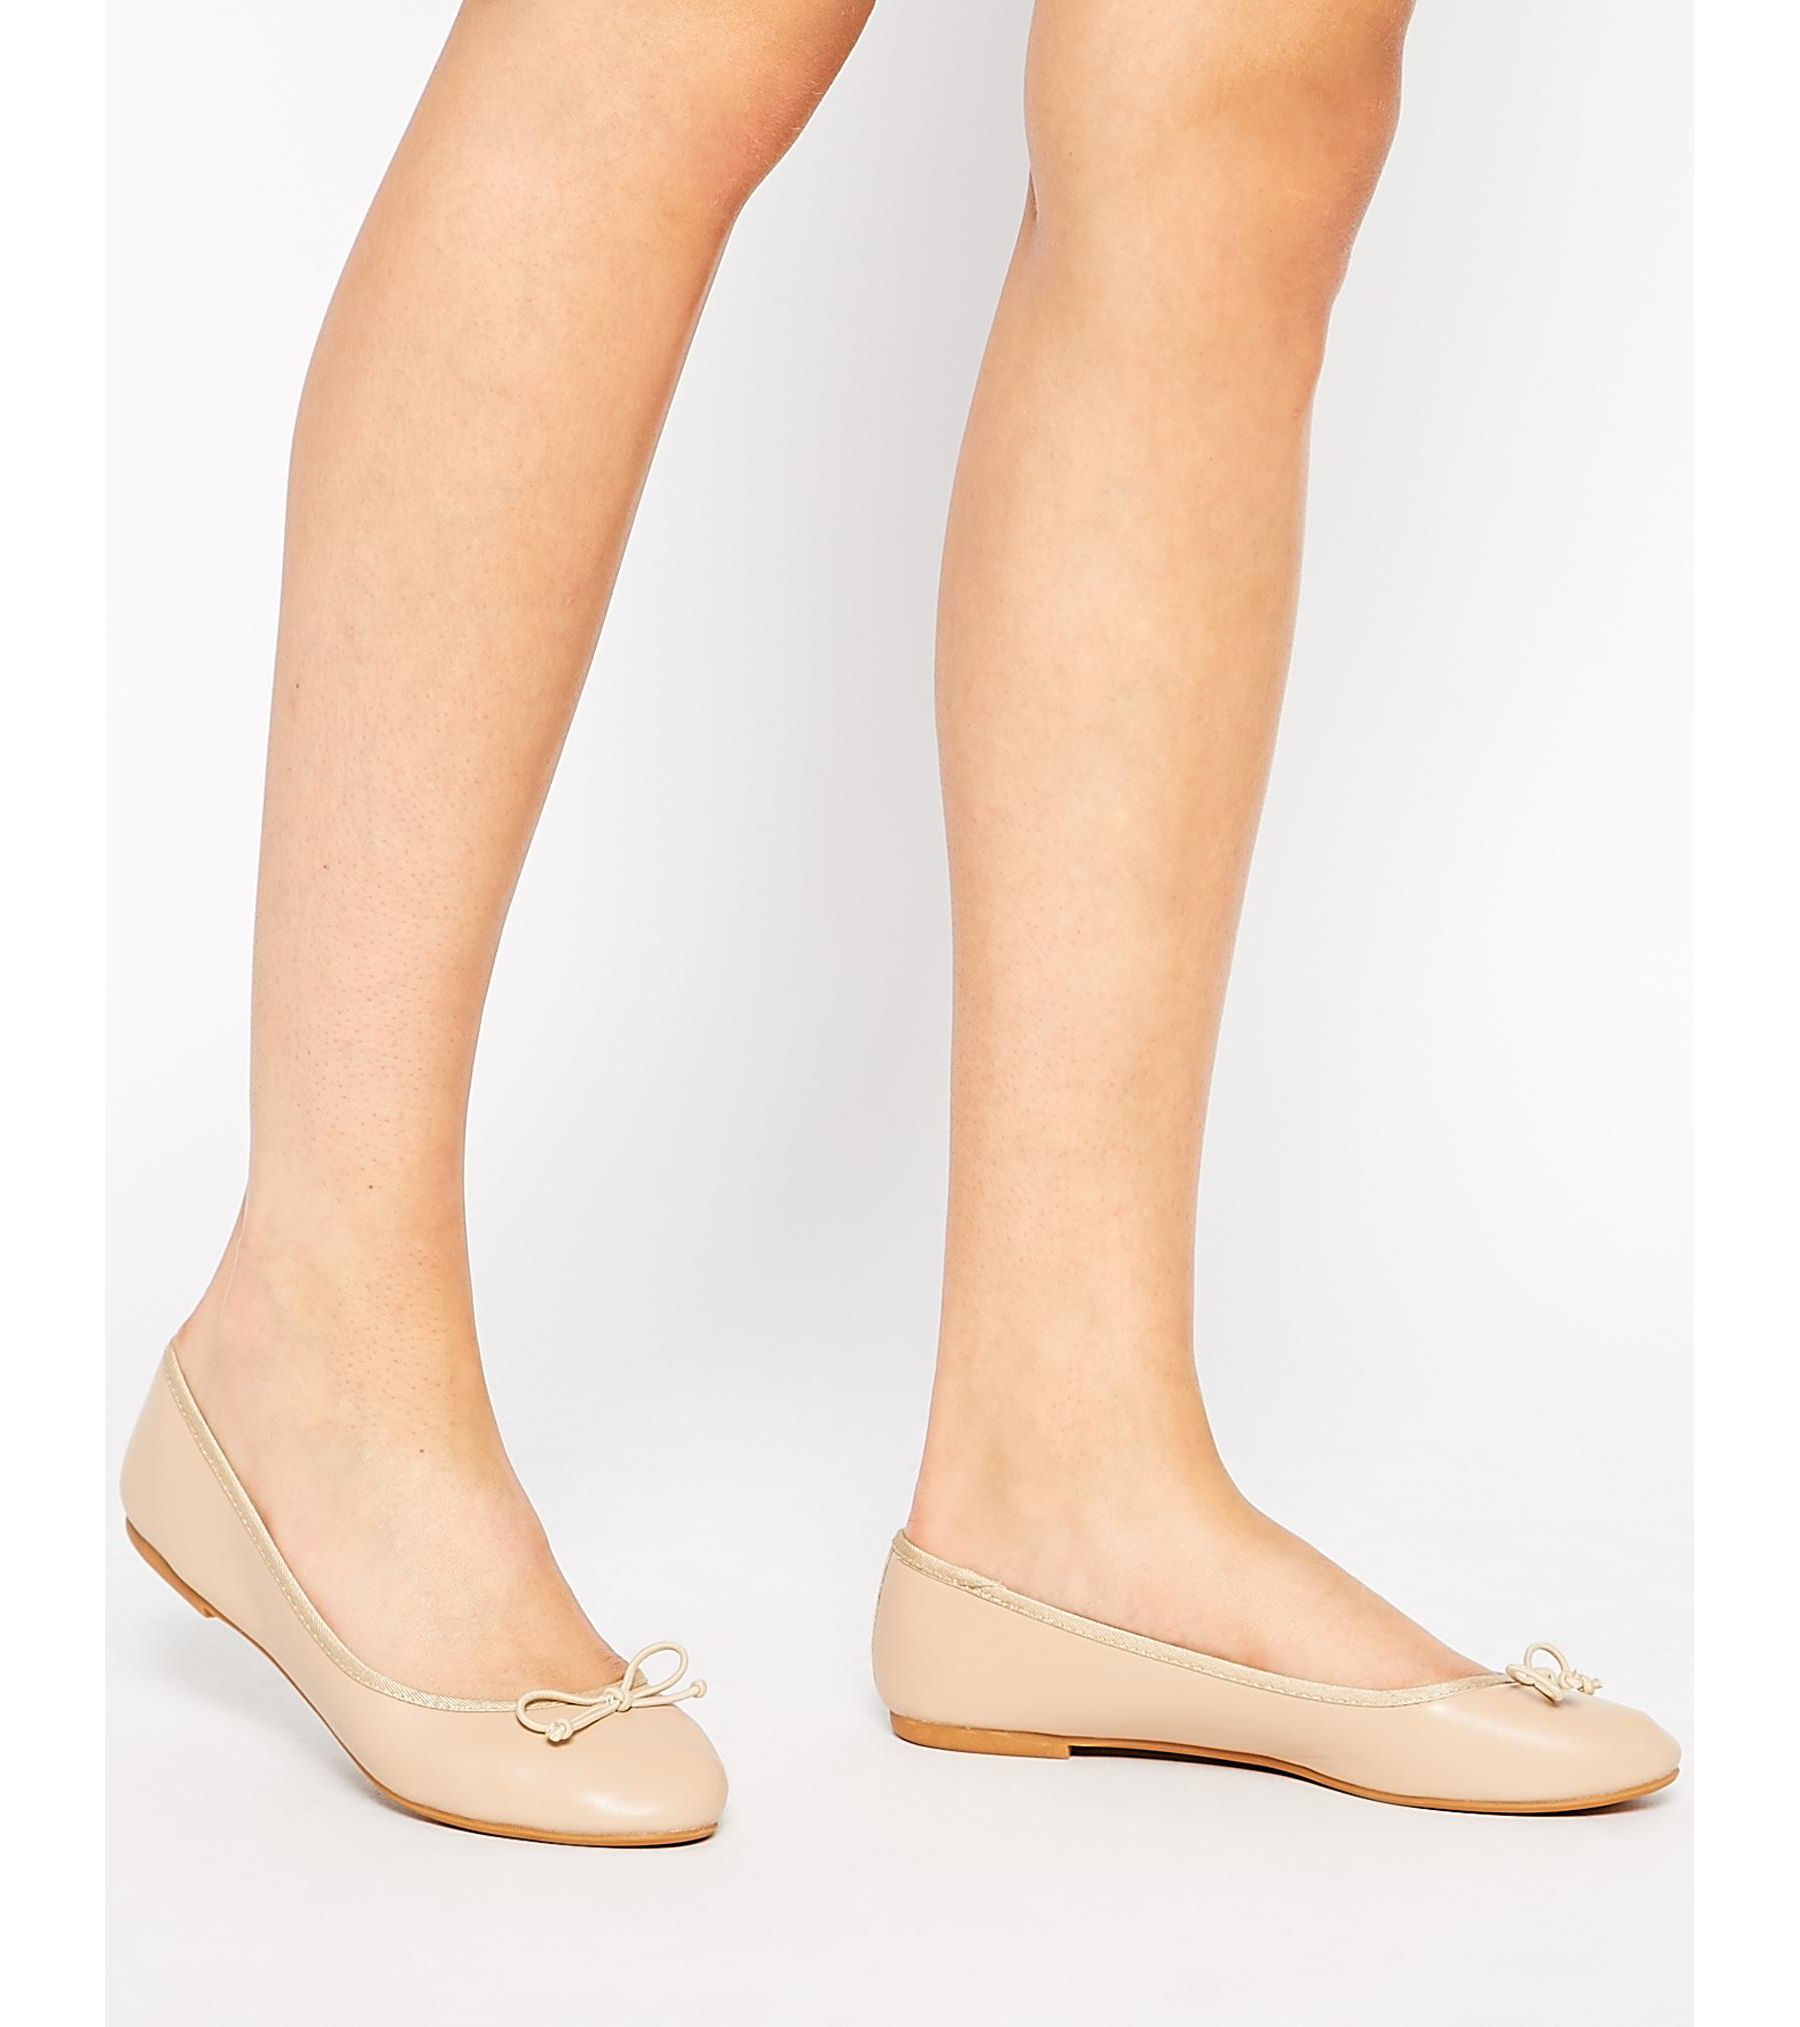 Lyst - Asos Lily Pad Ballet Flats in Natural